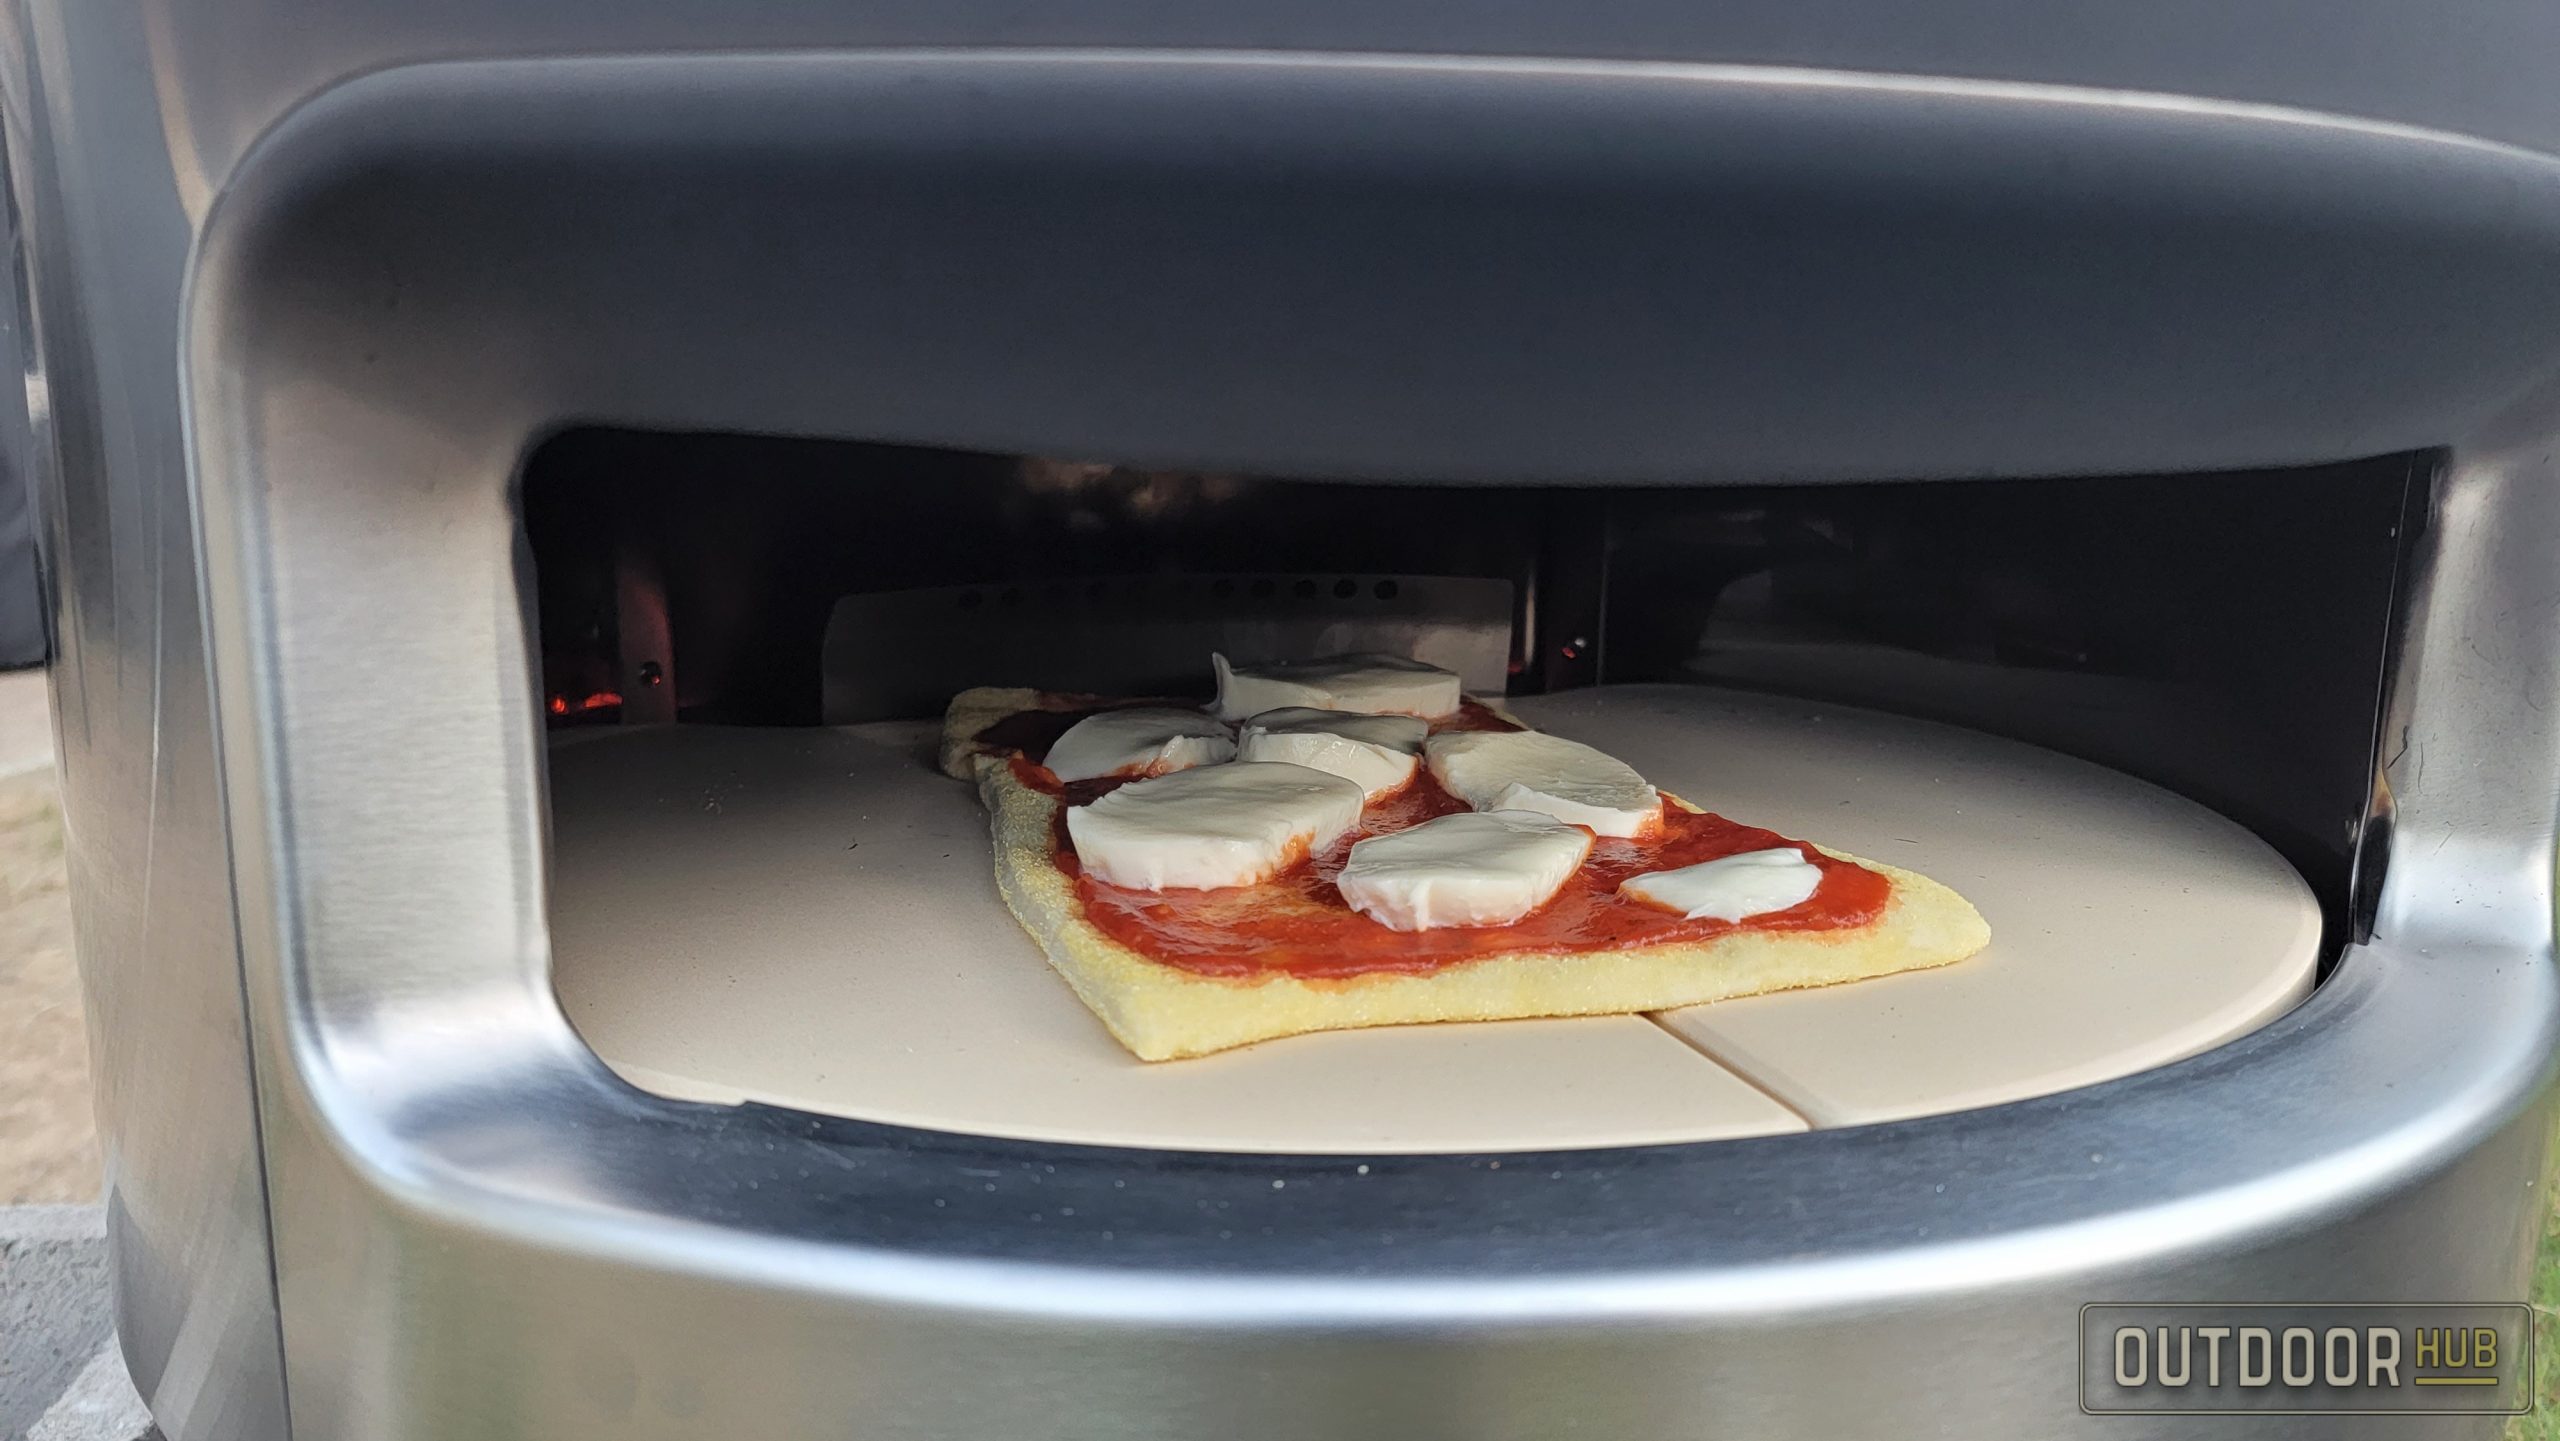 REVIEW: The Solostove Pi Wood-Fired Pizza Oven